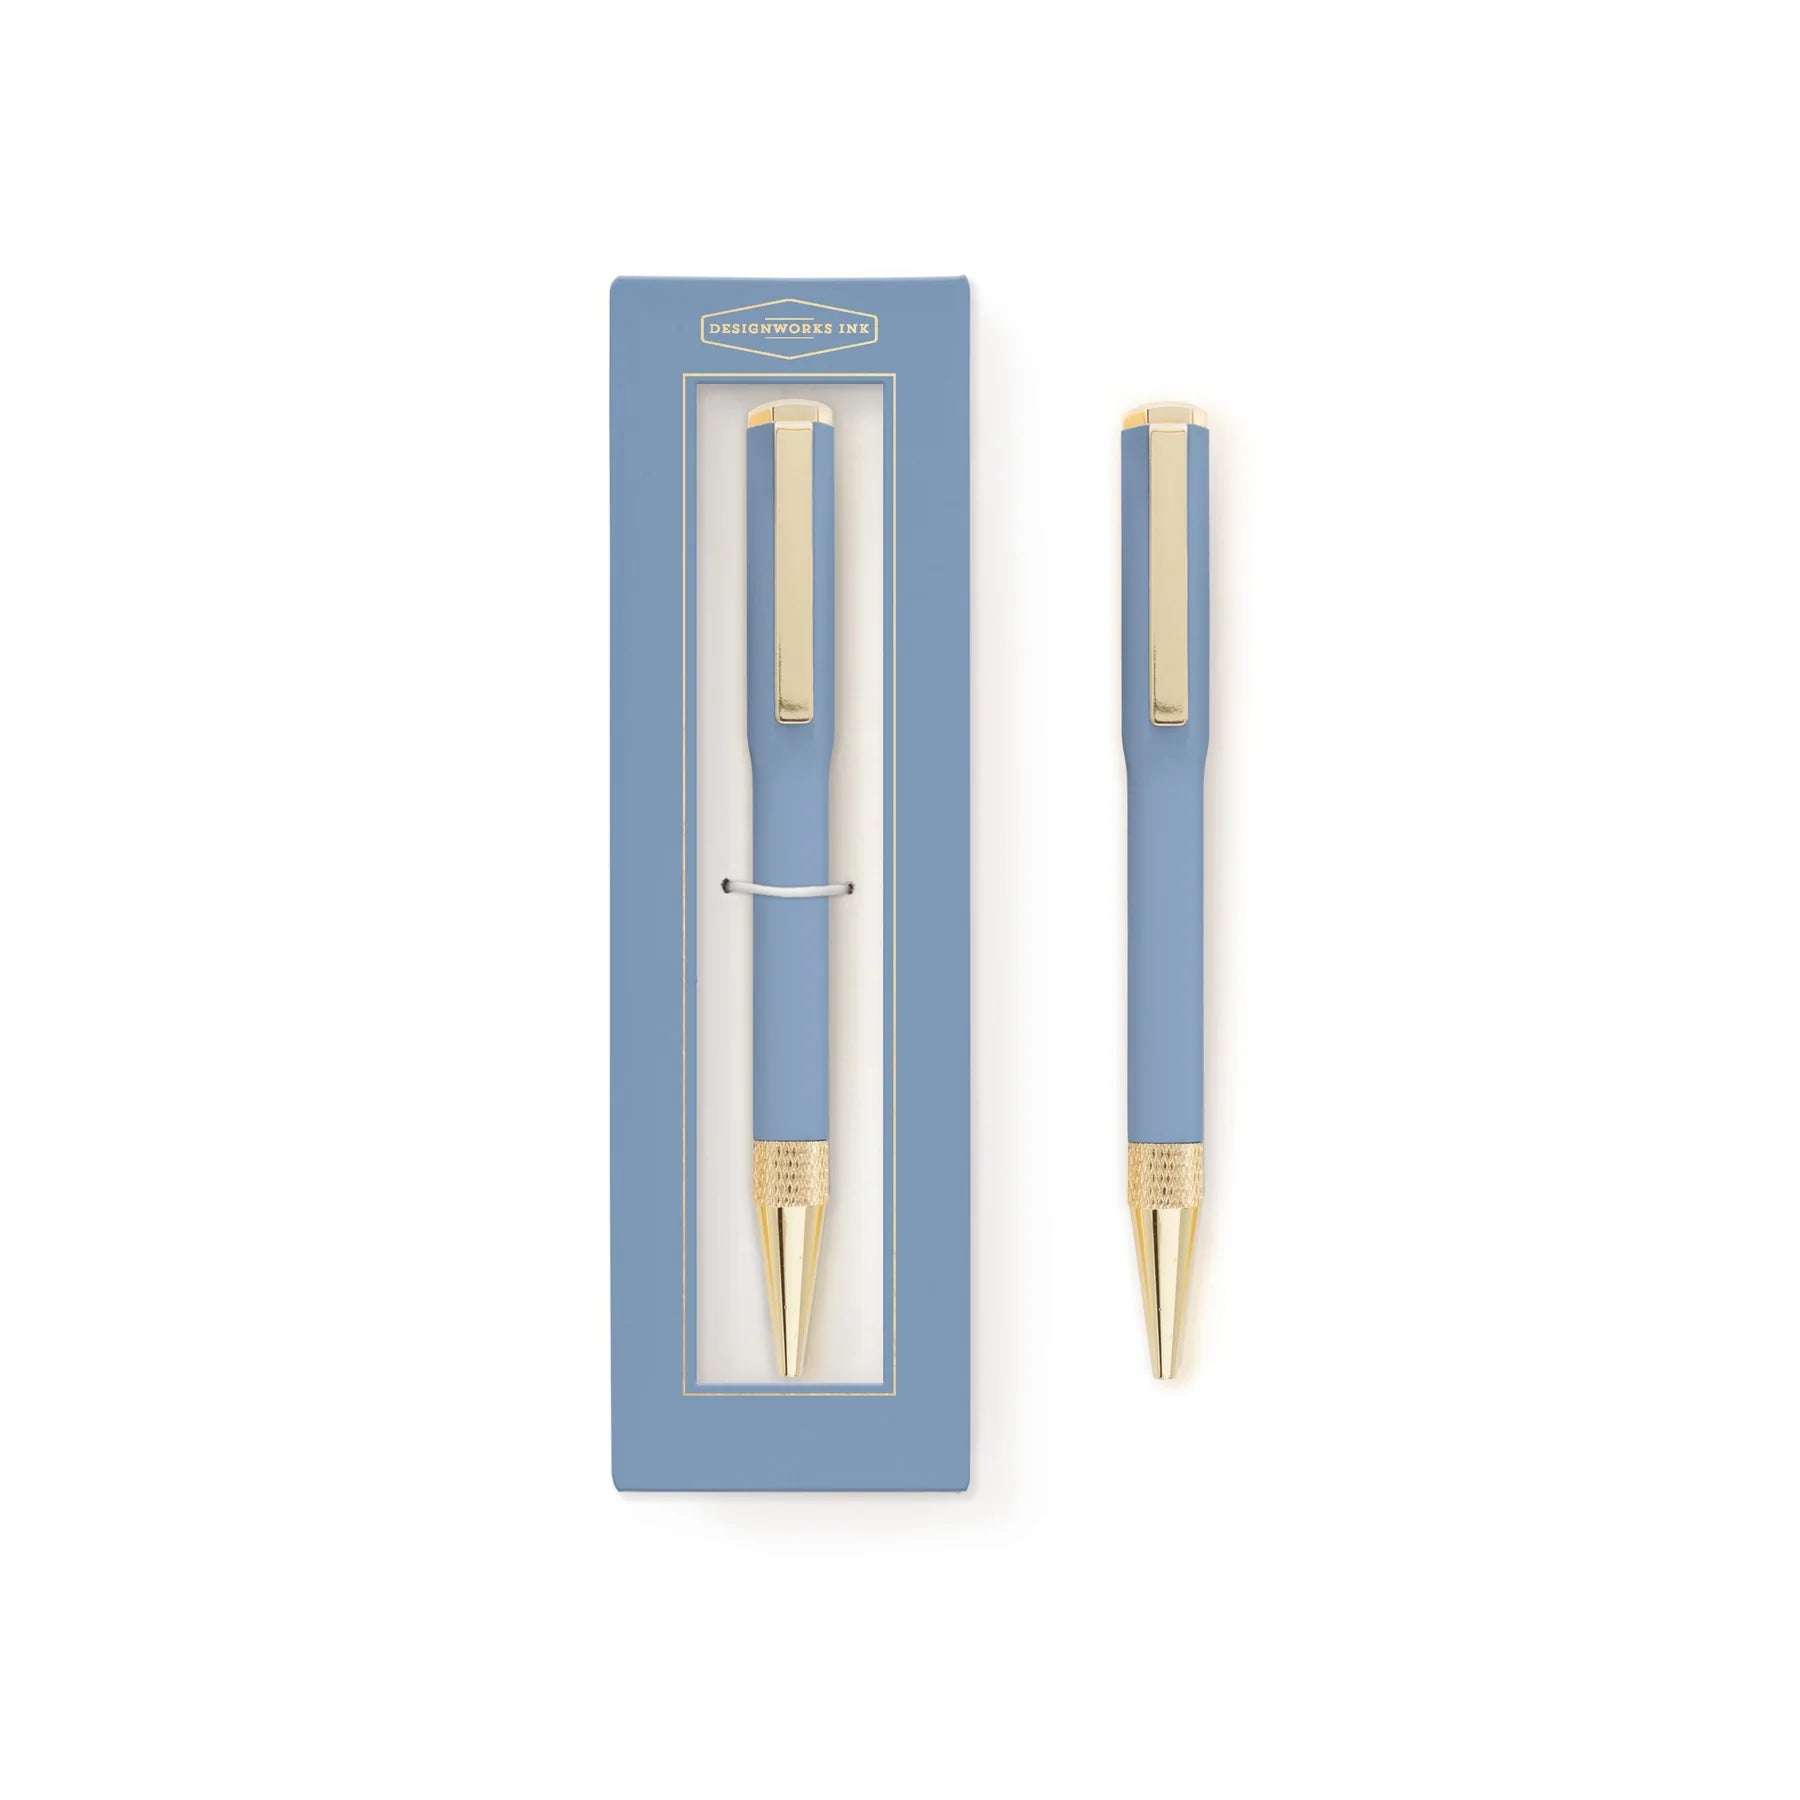 Cornflower blue block colour boxed pen from the Pencil Me In stationery shop.